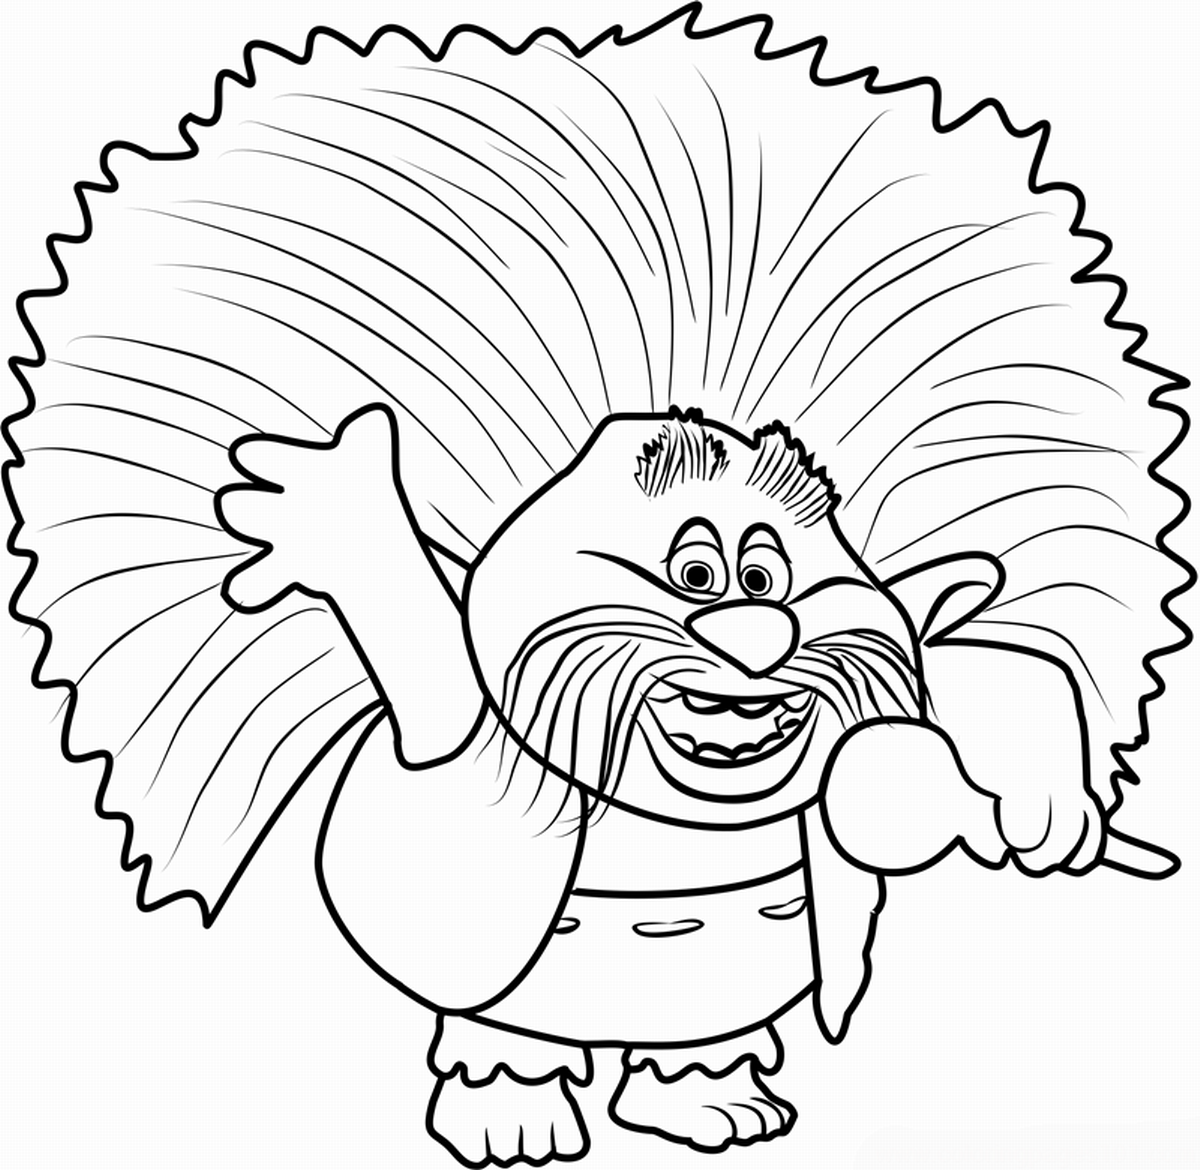 145 Simple Trolls The Movie Coloring Pages for Kindergarten